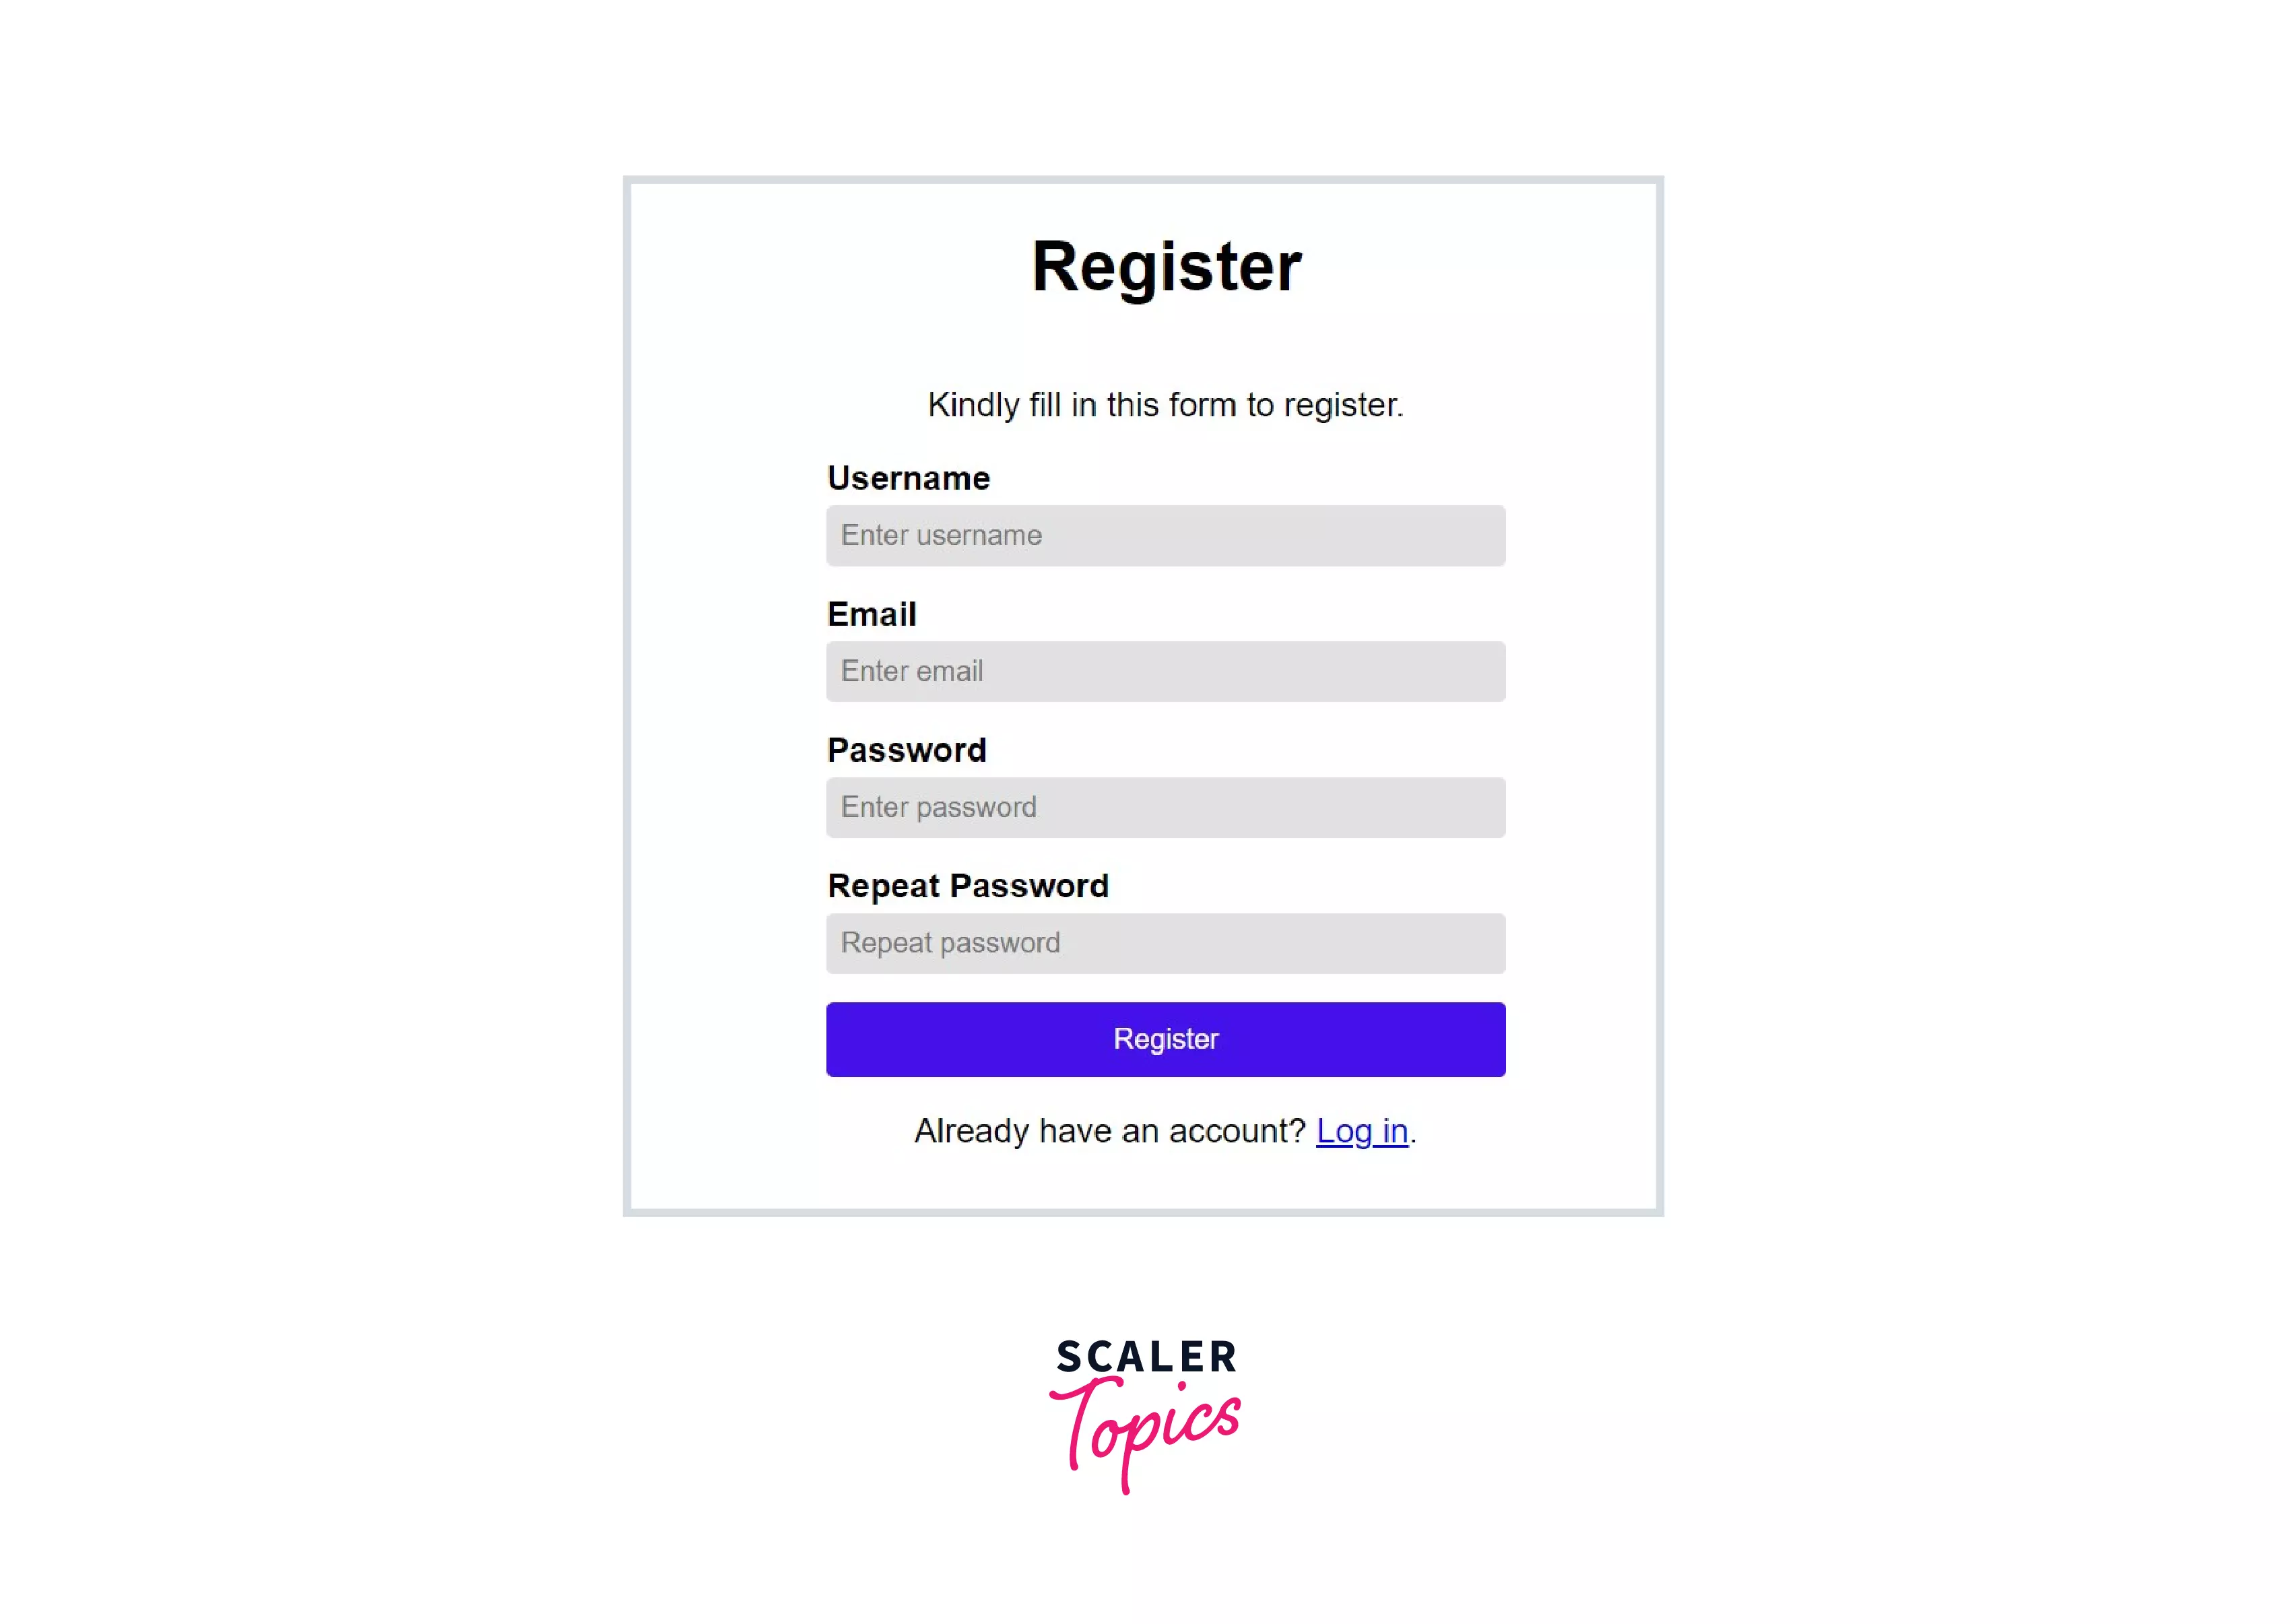 adding colors to the registration form